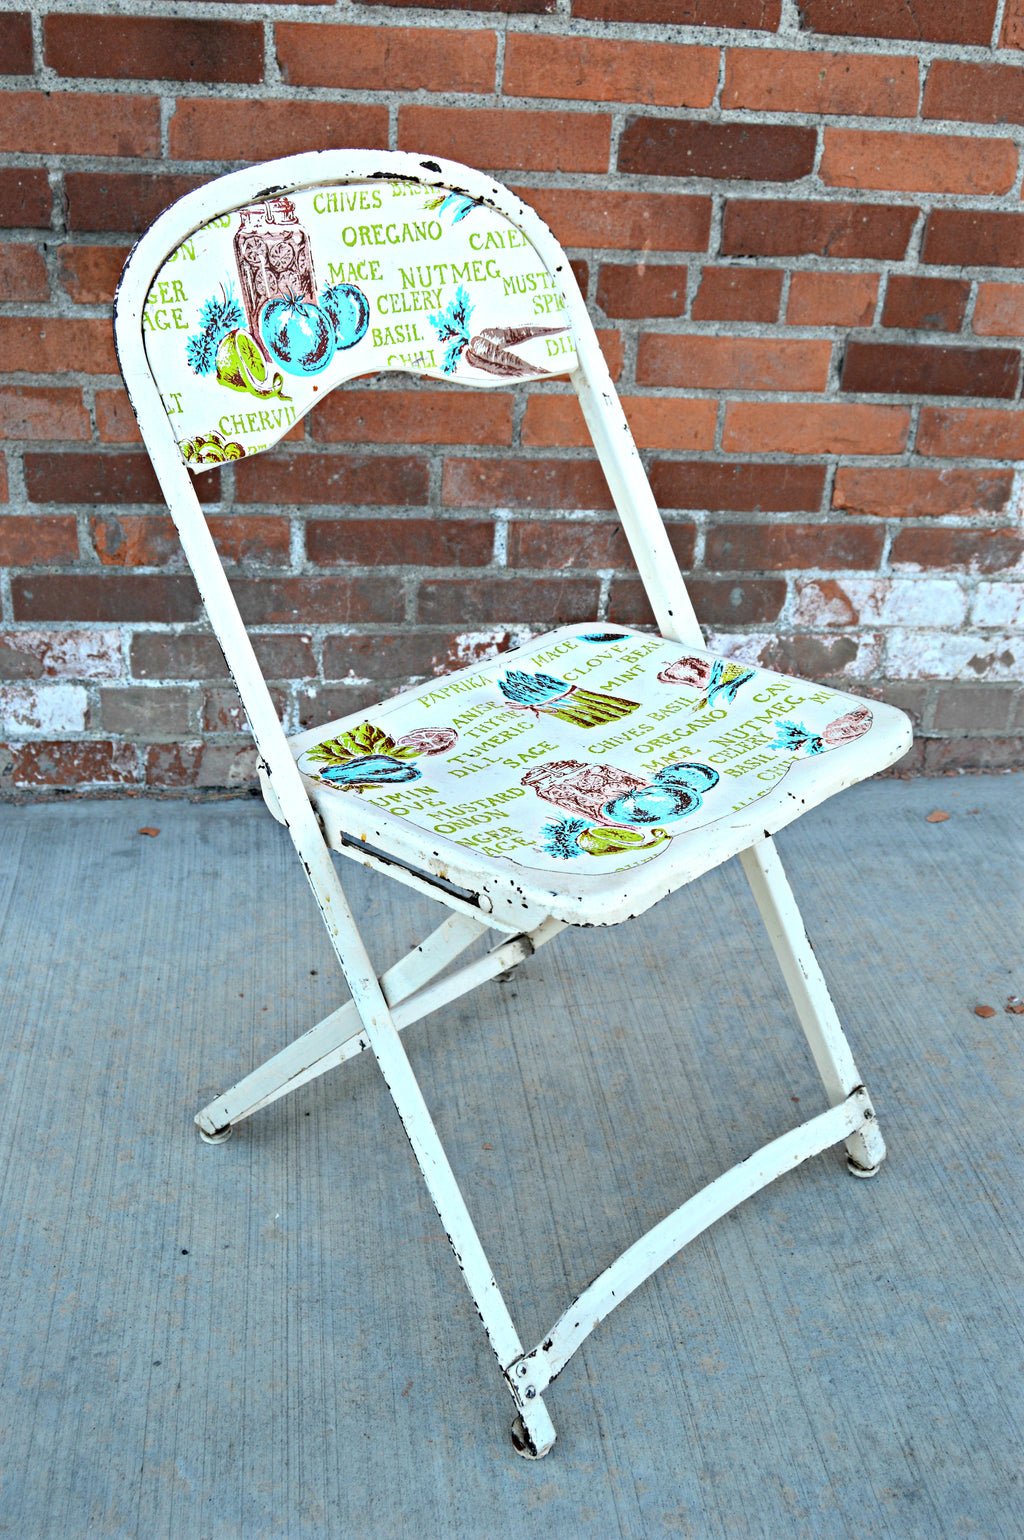 Antique metal chairs in white and cooking spice print